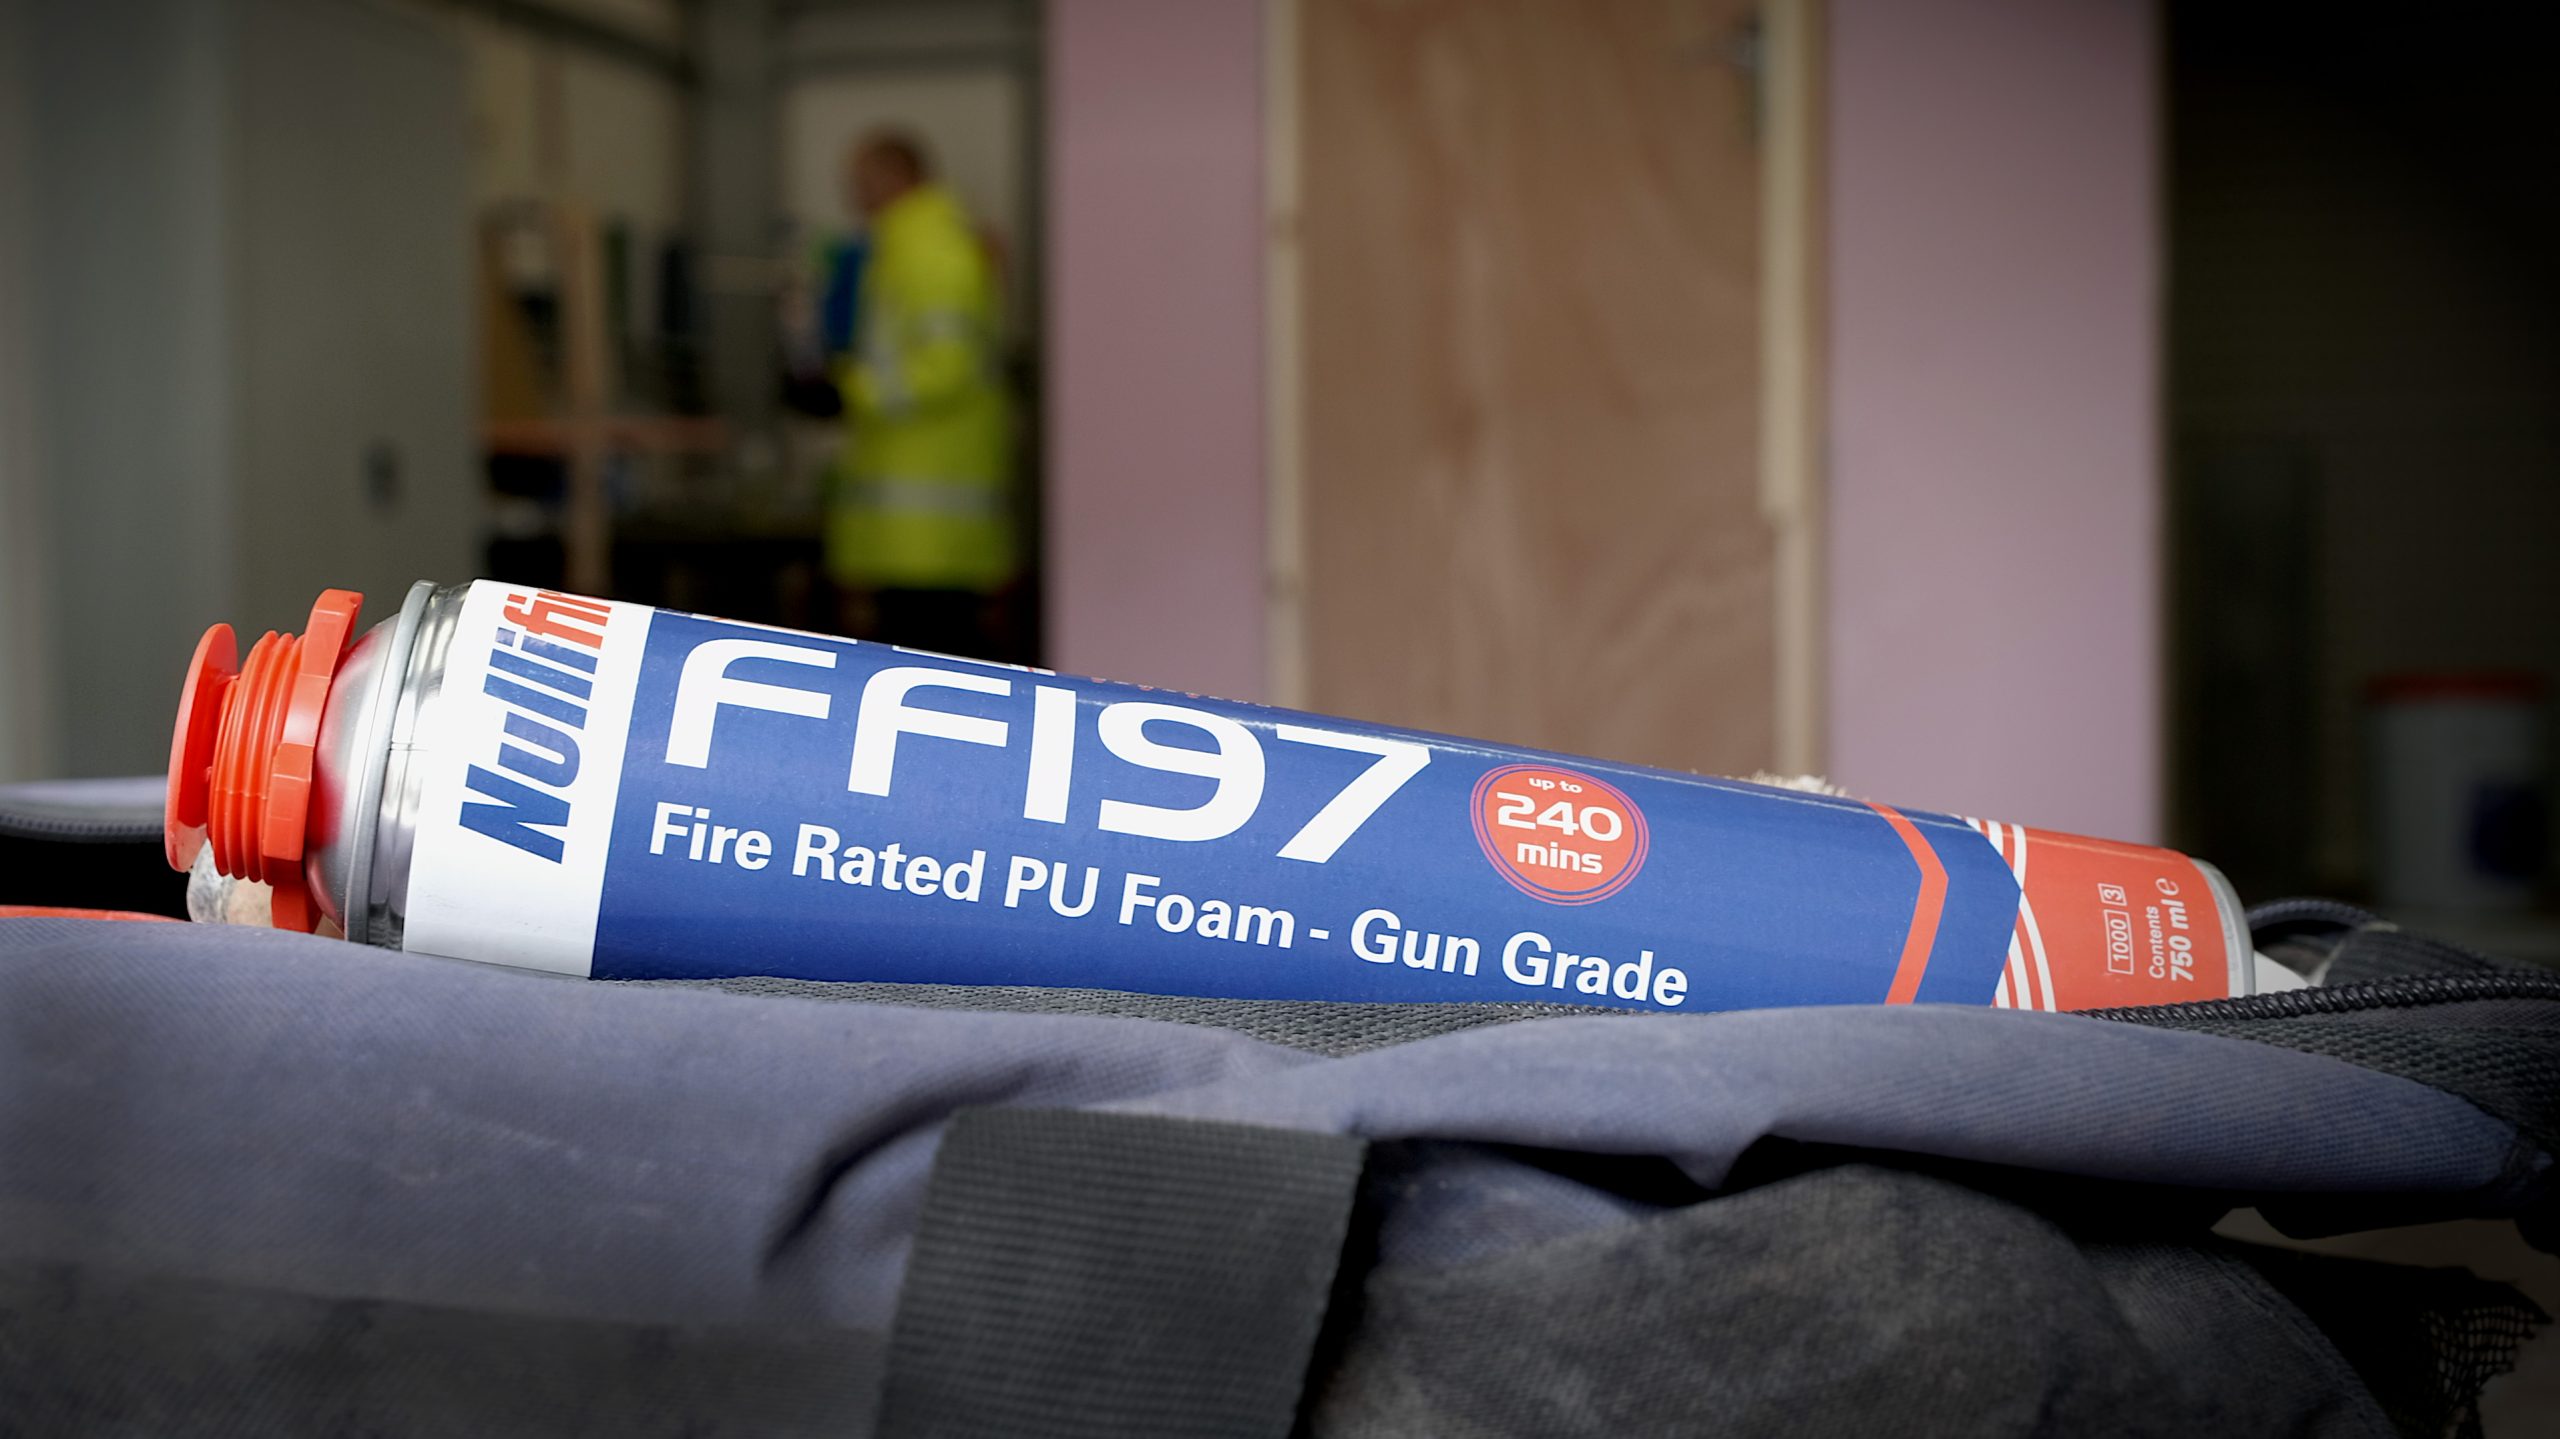 What is Nullifire Intumescent PU Foam and how do you use it?